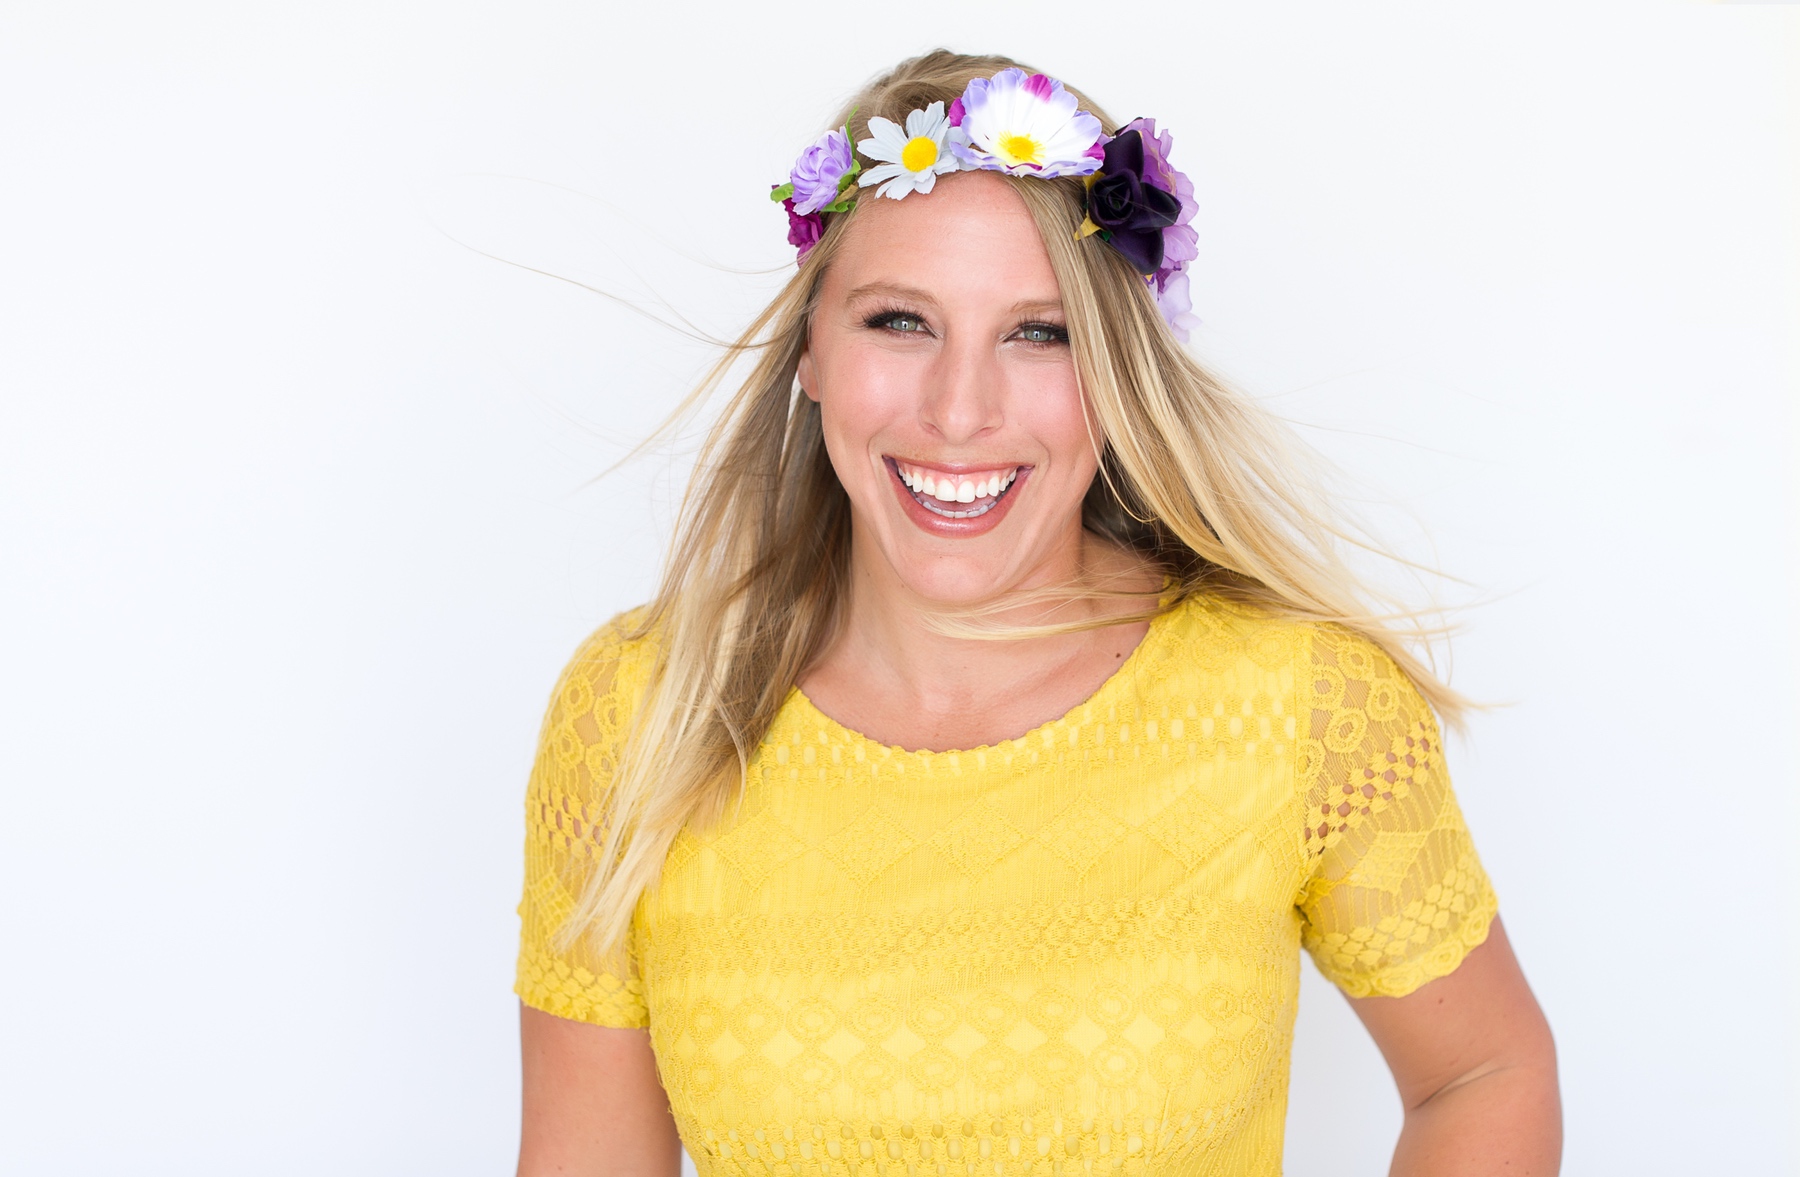 HEADBANDS OF HOPE: MAKING AN IMPACT ONE CHILD AT A TIME (& A GIVEAWAY!) - THE YELLOW ROOM